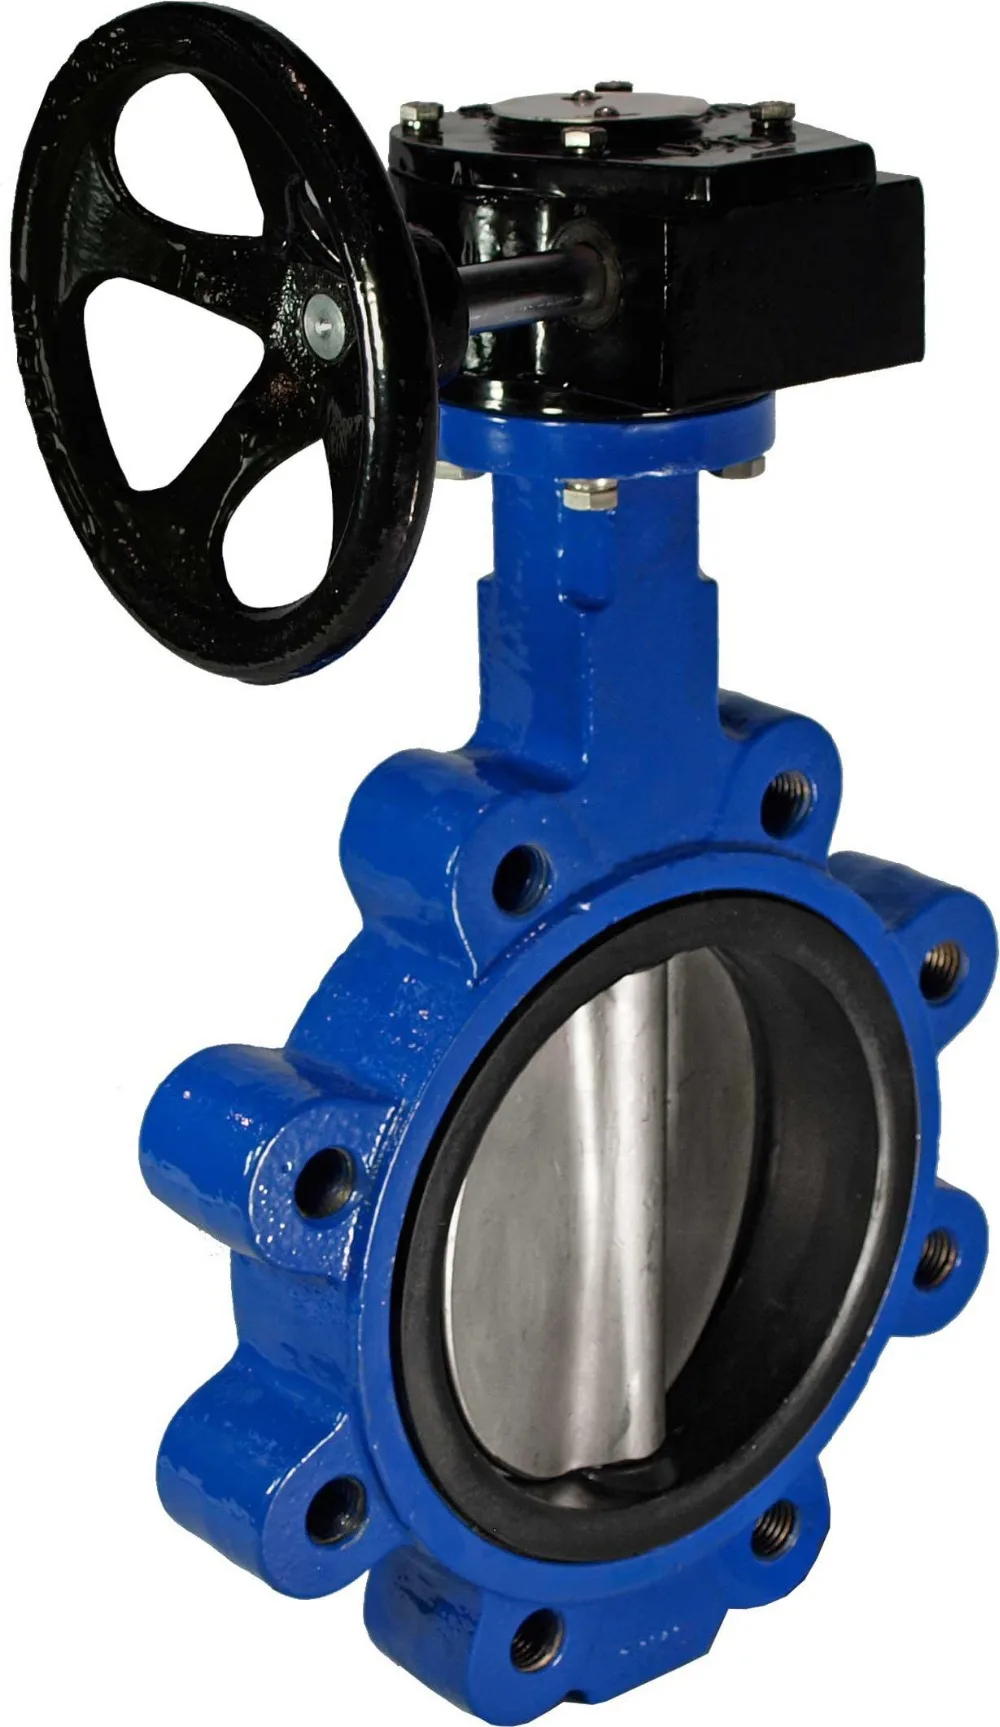 Liner Epdm Rubber Metal Seat Butterfly Valve - Buy Butterfly Valve ...